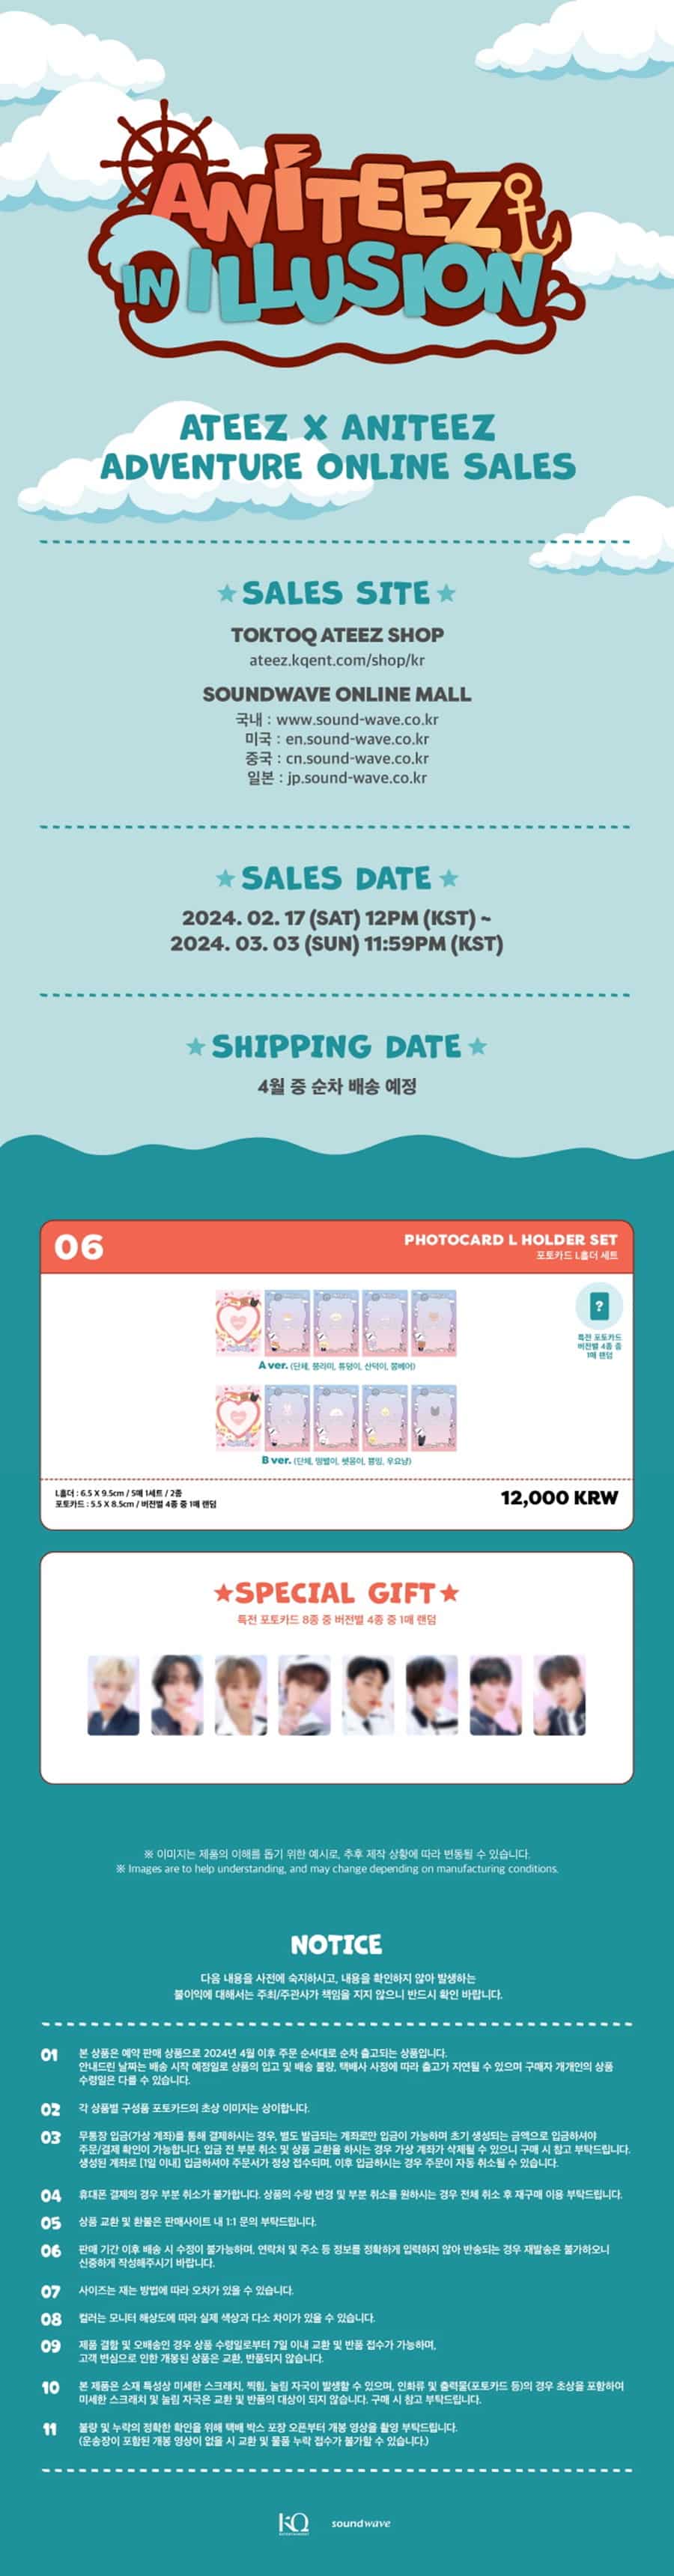 aniteez-aniteez-in-illusion-official-md-photocard-l-holder-set-wholesales